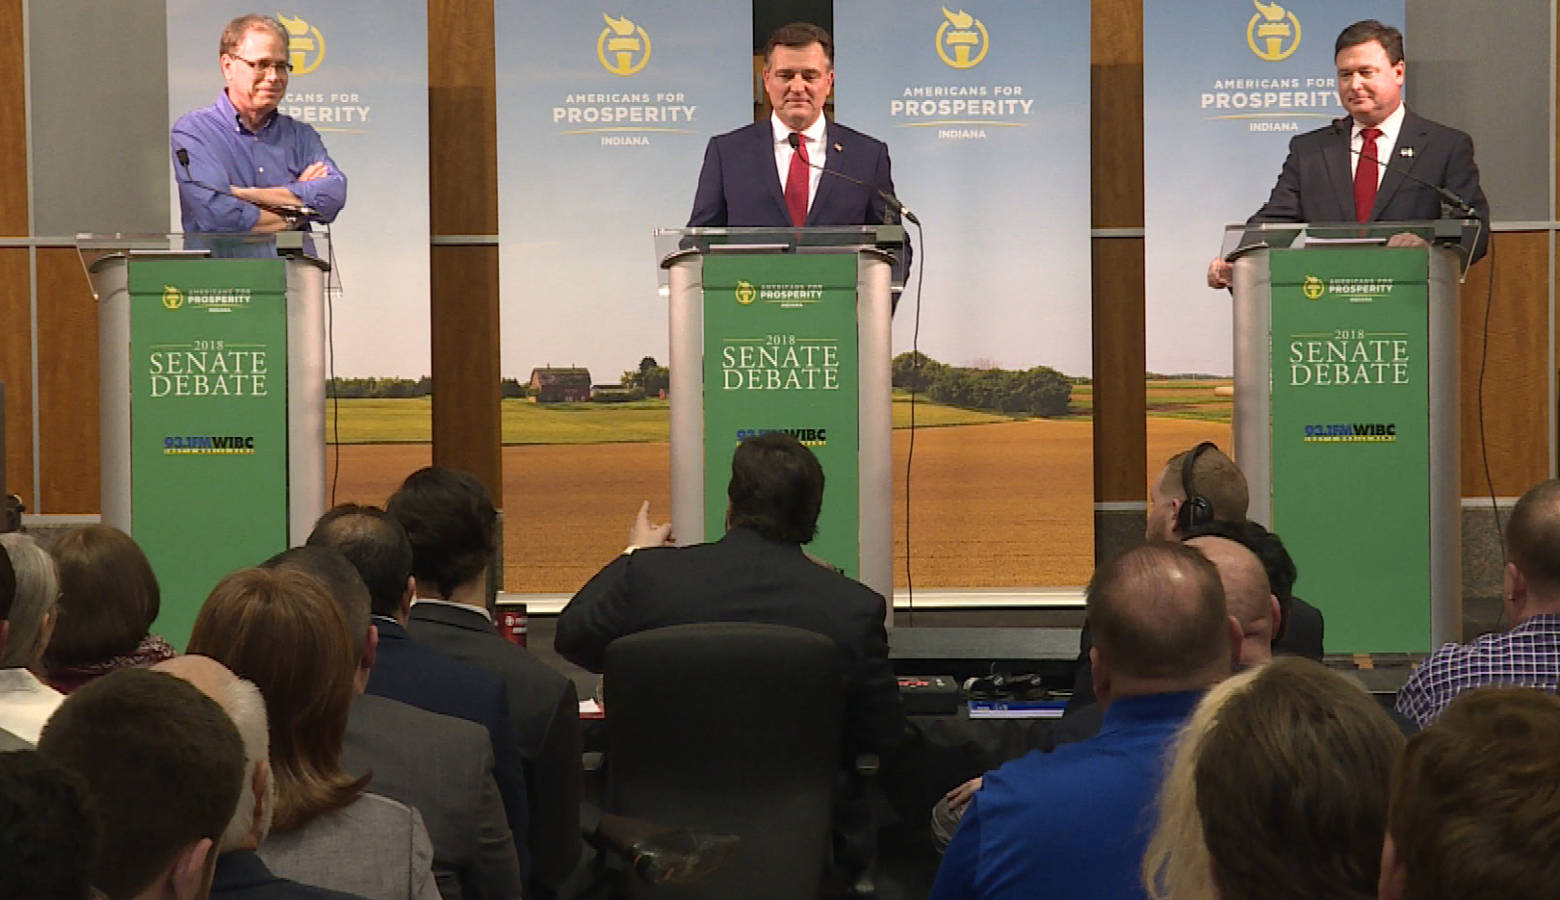 Former state lawmaker Mike Braun, U.S. Rep. Luke Messer and U.S. Rep. Todd Rokita participate in a debate sponsored by by conservative group Americans for Prosperity-Indiana. (Barbara Brosher/WTIU)